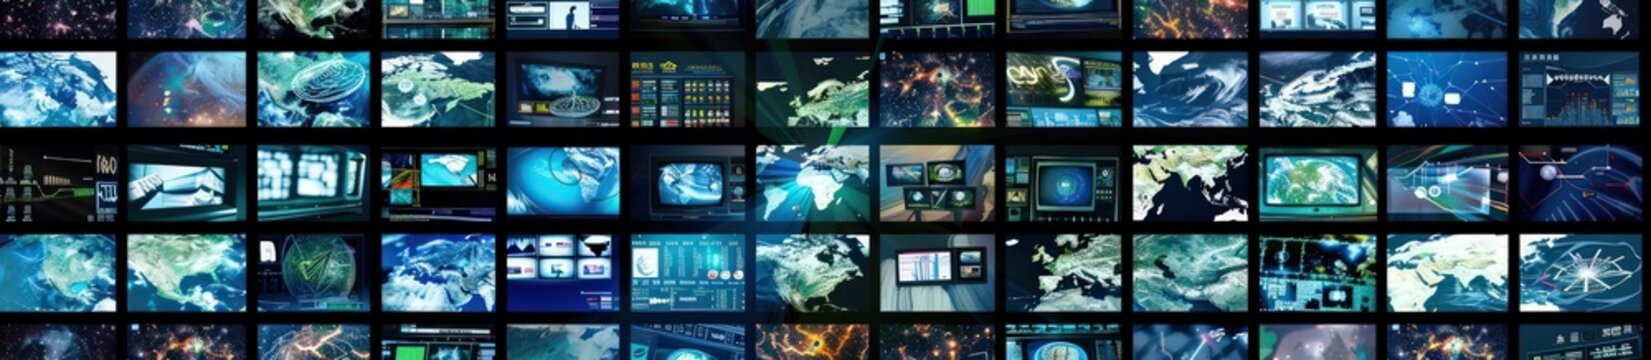 a large number of video screens show televisions around the globe, in the style of intertwined networks